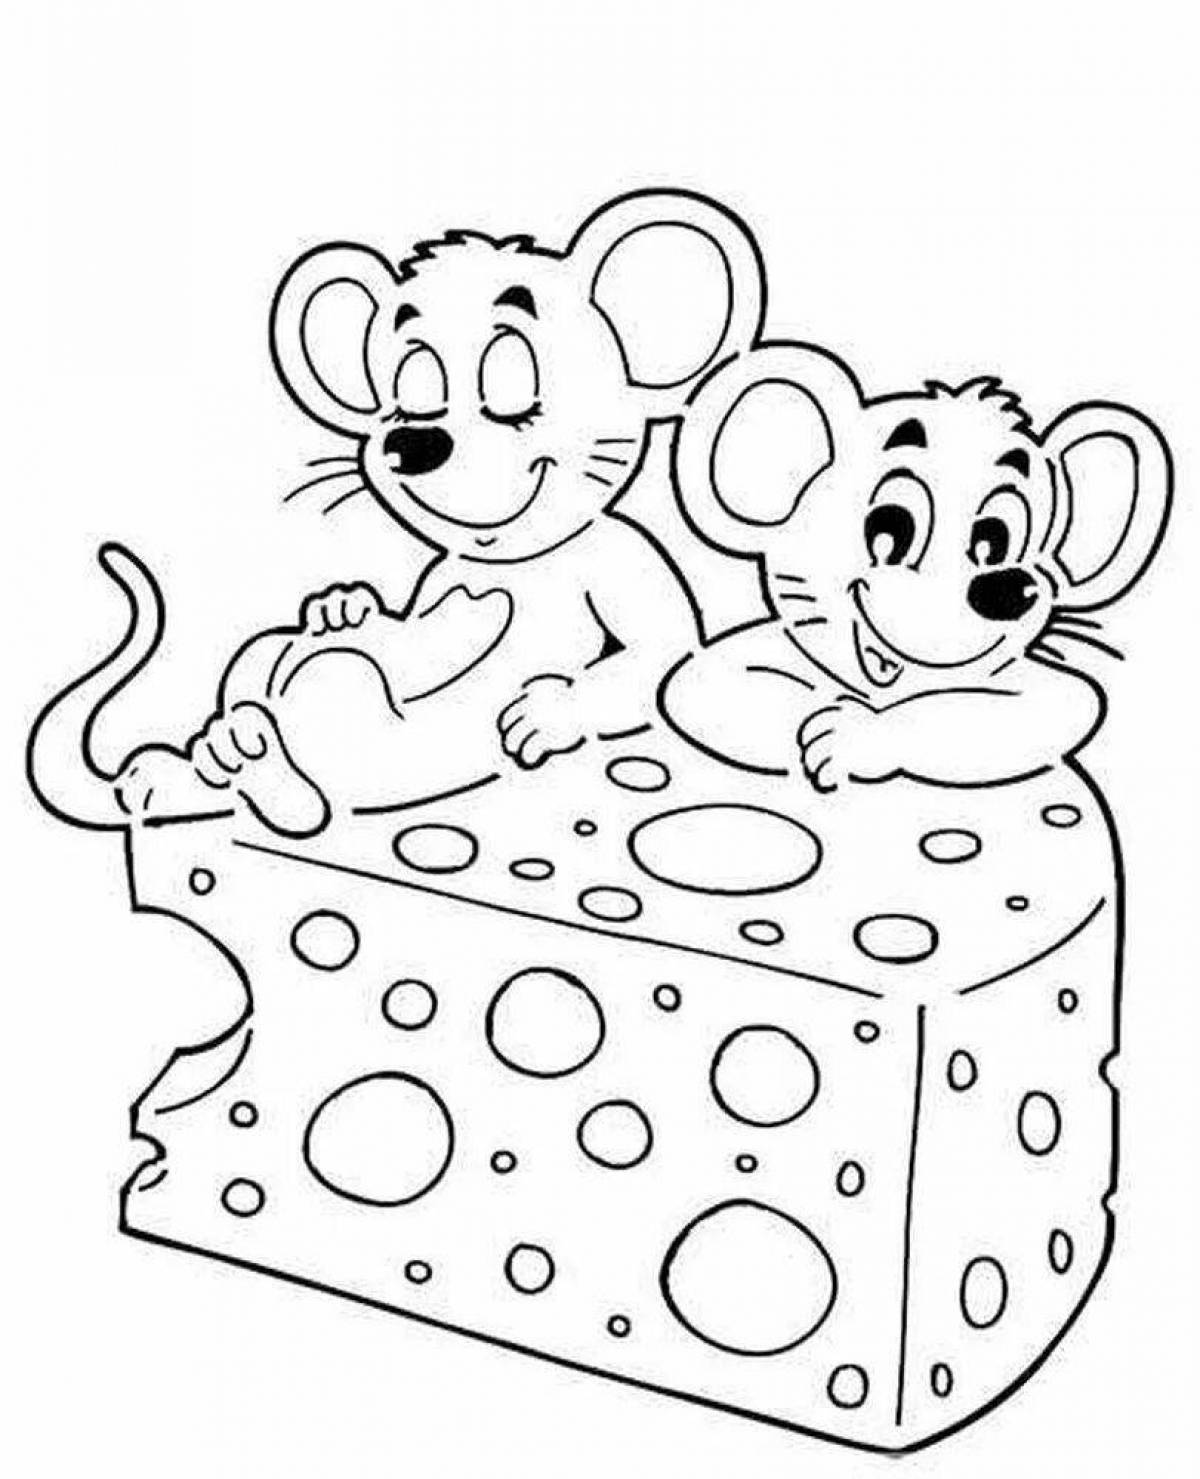 Mouse with cheese #5